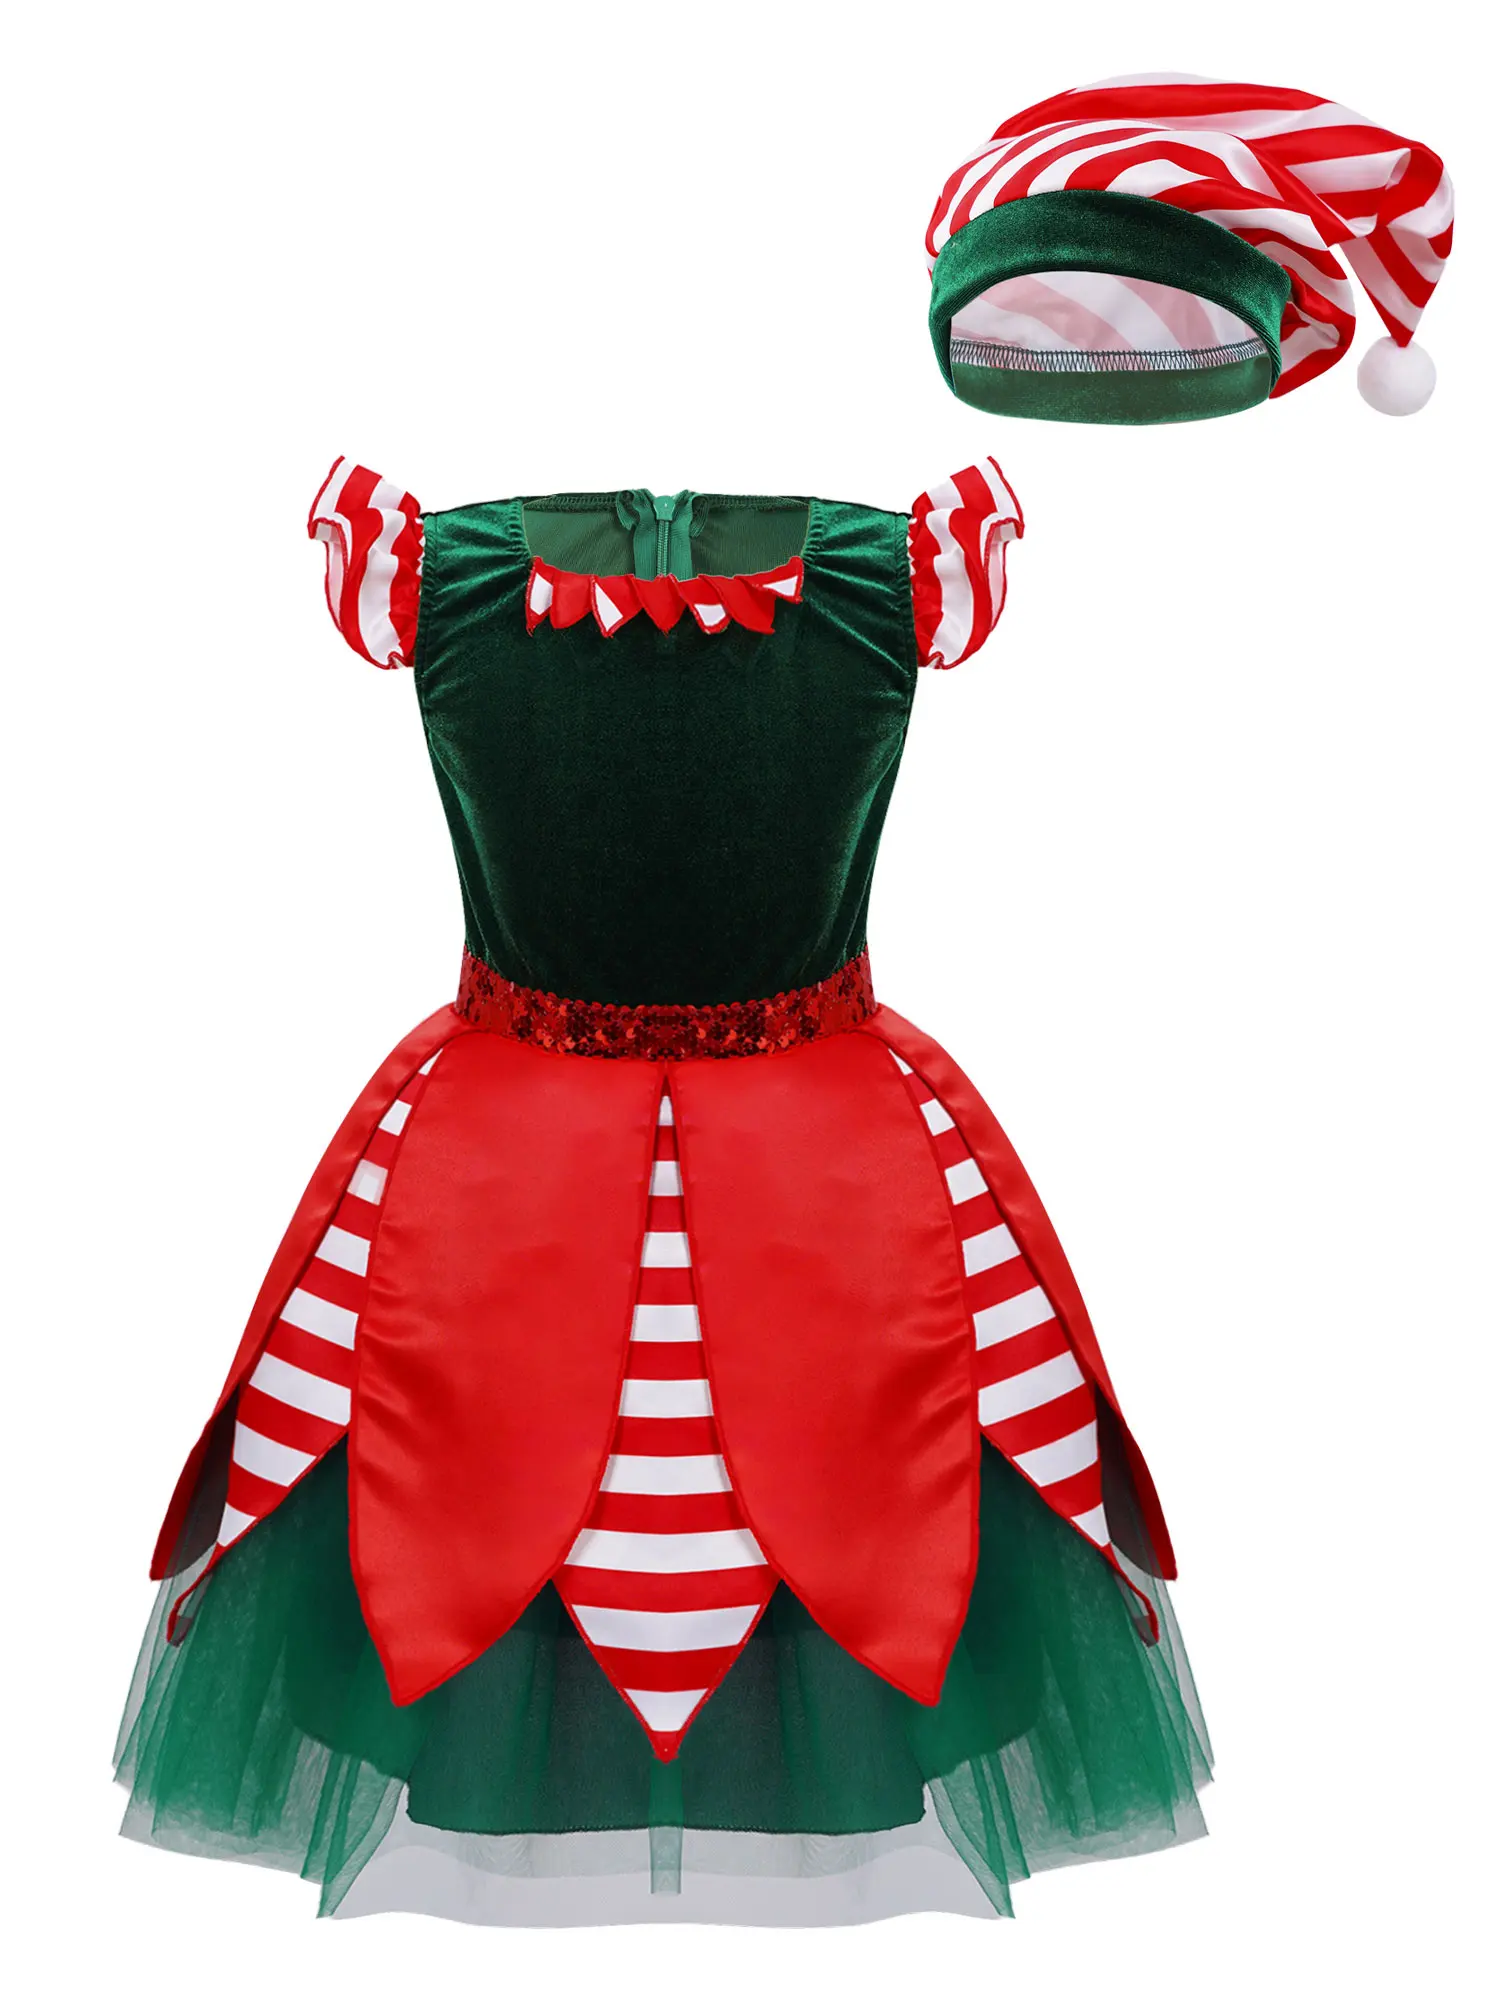 

Kids Girls Elf Christmas Costume Xmas Santa Clause Fancy Tutu Dress Leotard With Hat Carnival New Year Party Cosplay Dress Up